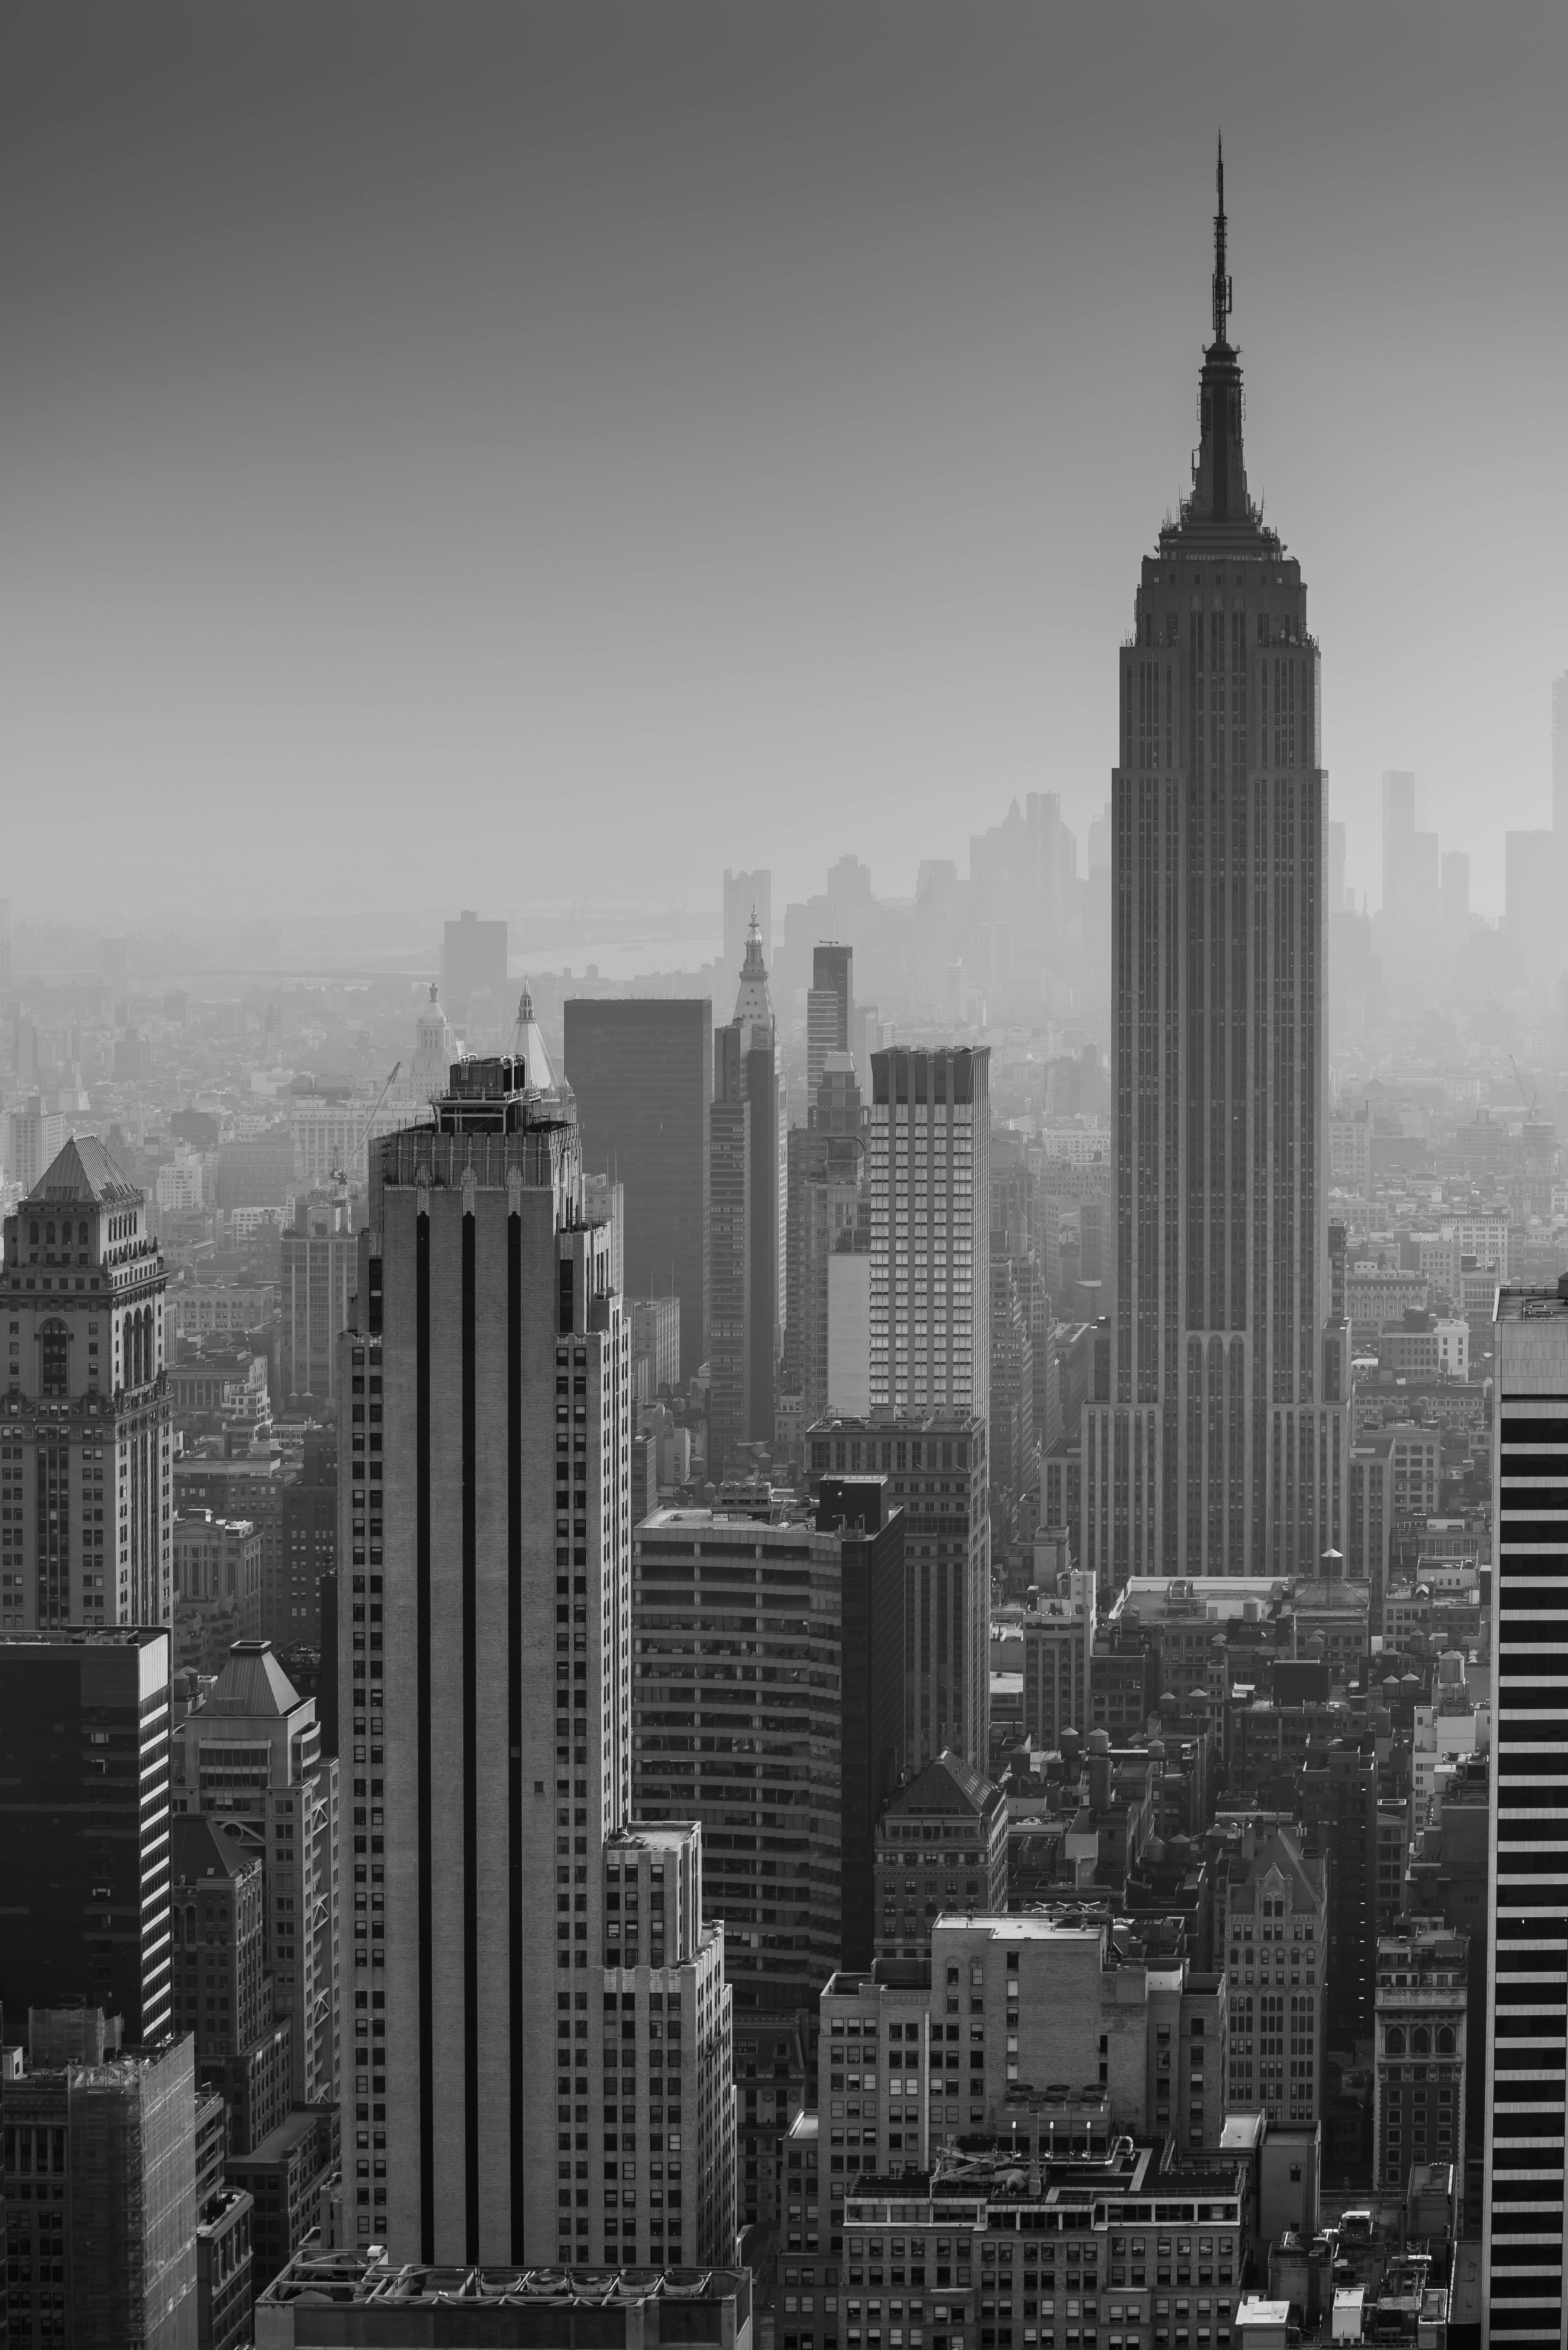 skyscrapers, city, bw, chb, architecture, cities, building, view from above, new york